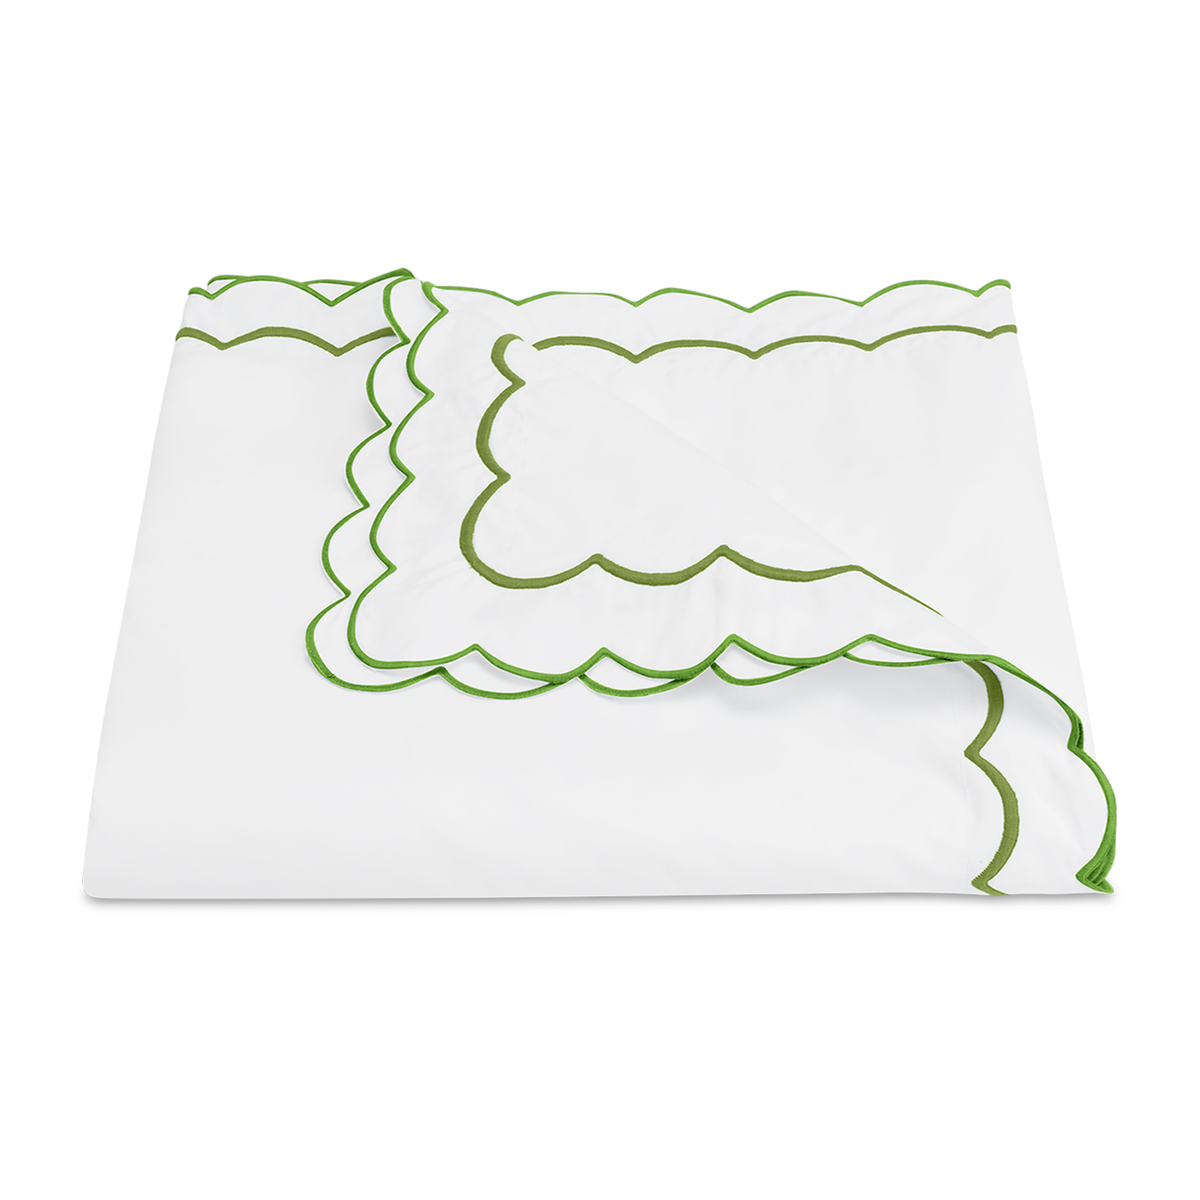 Duvet Cover of Matouk India Bedding in Grass Color